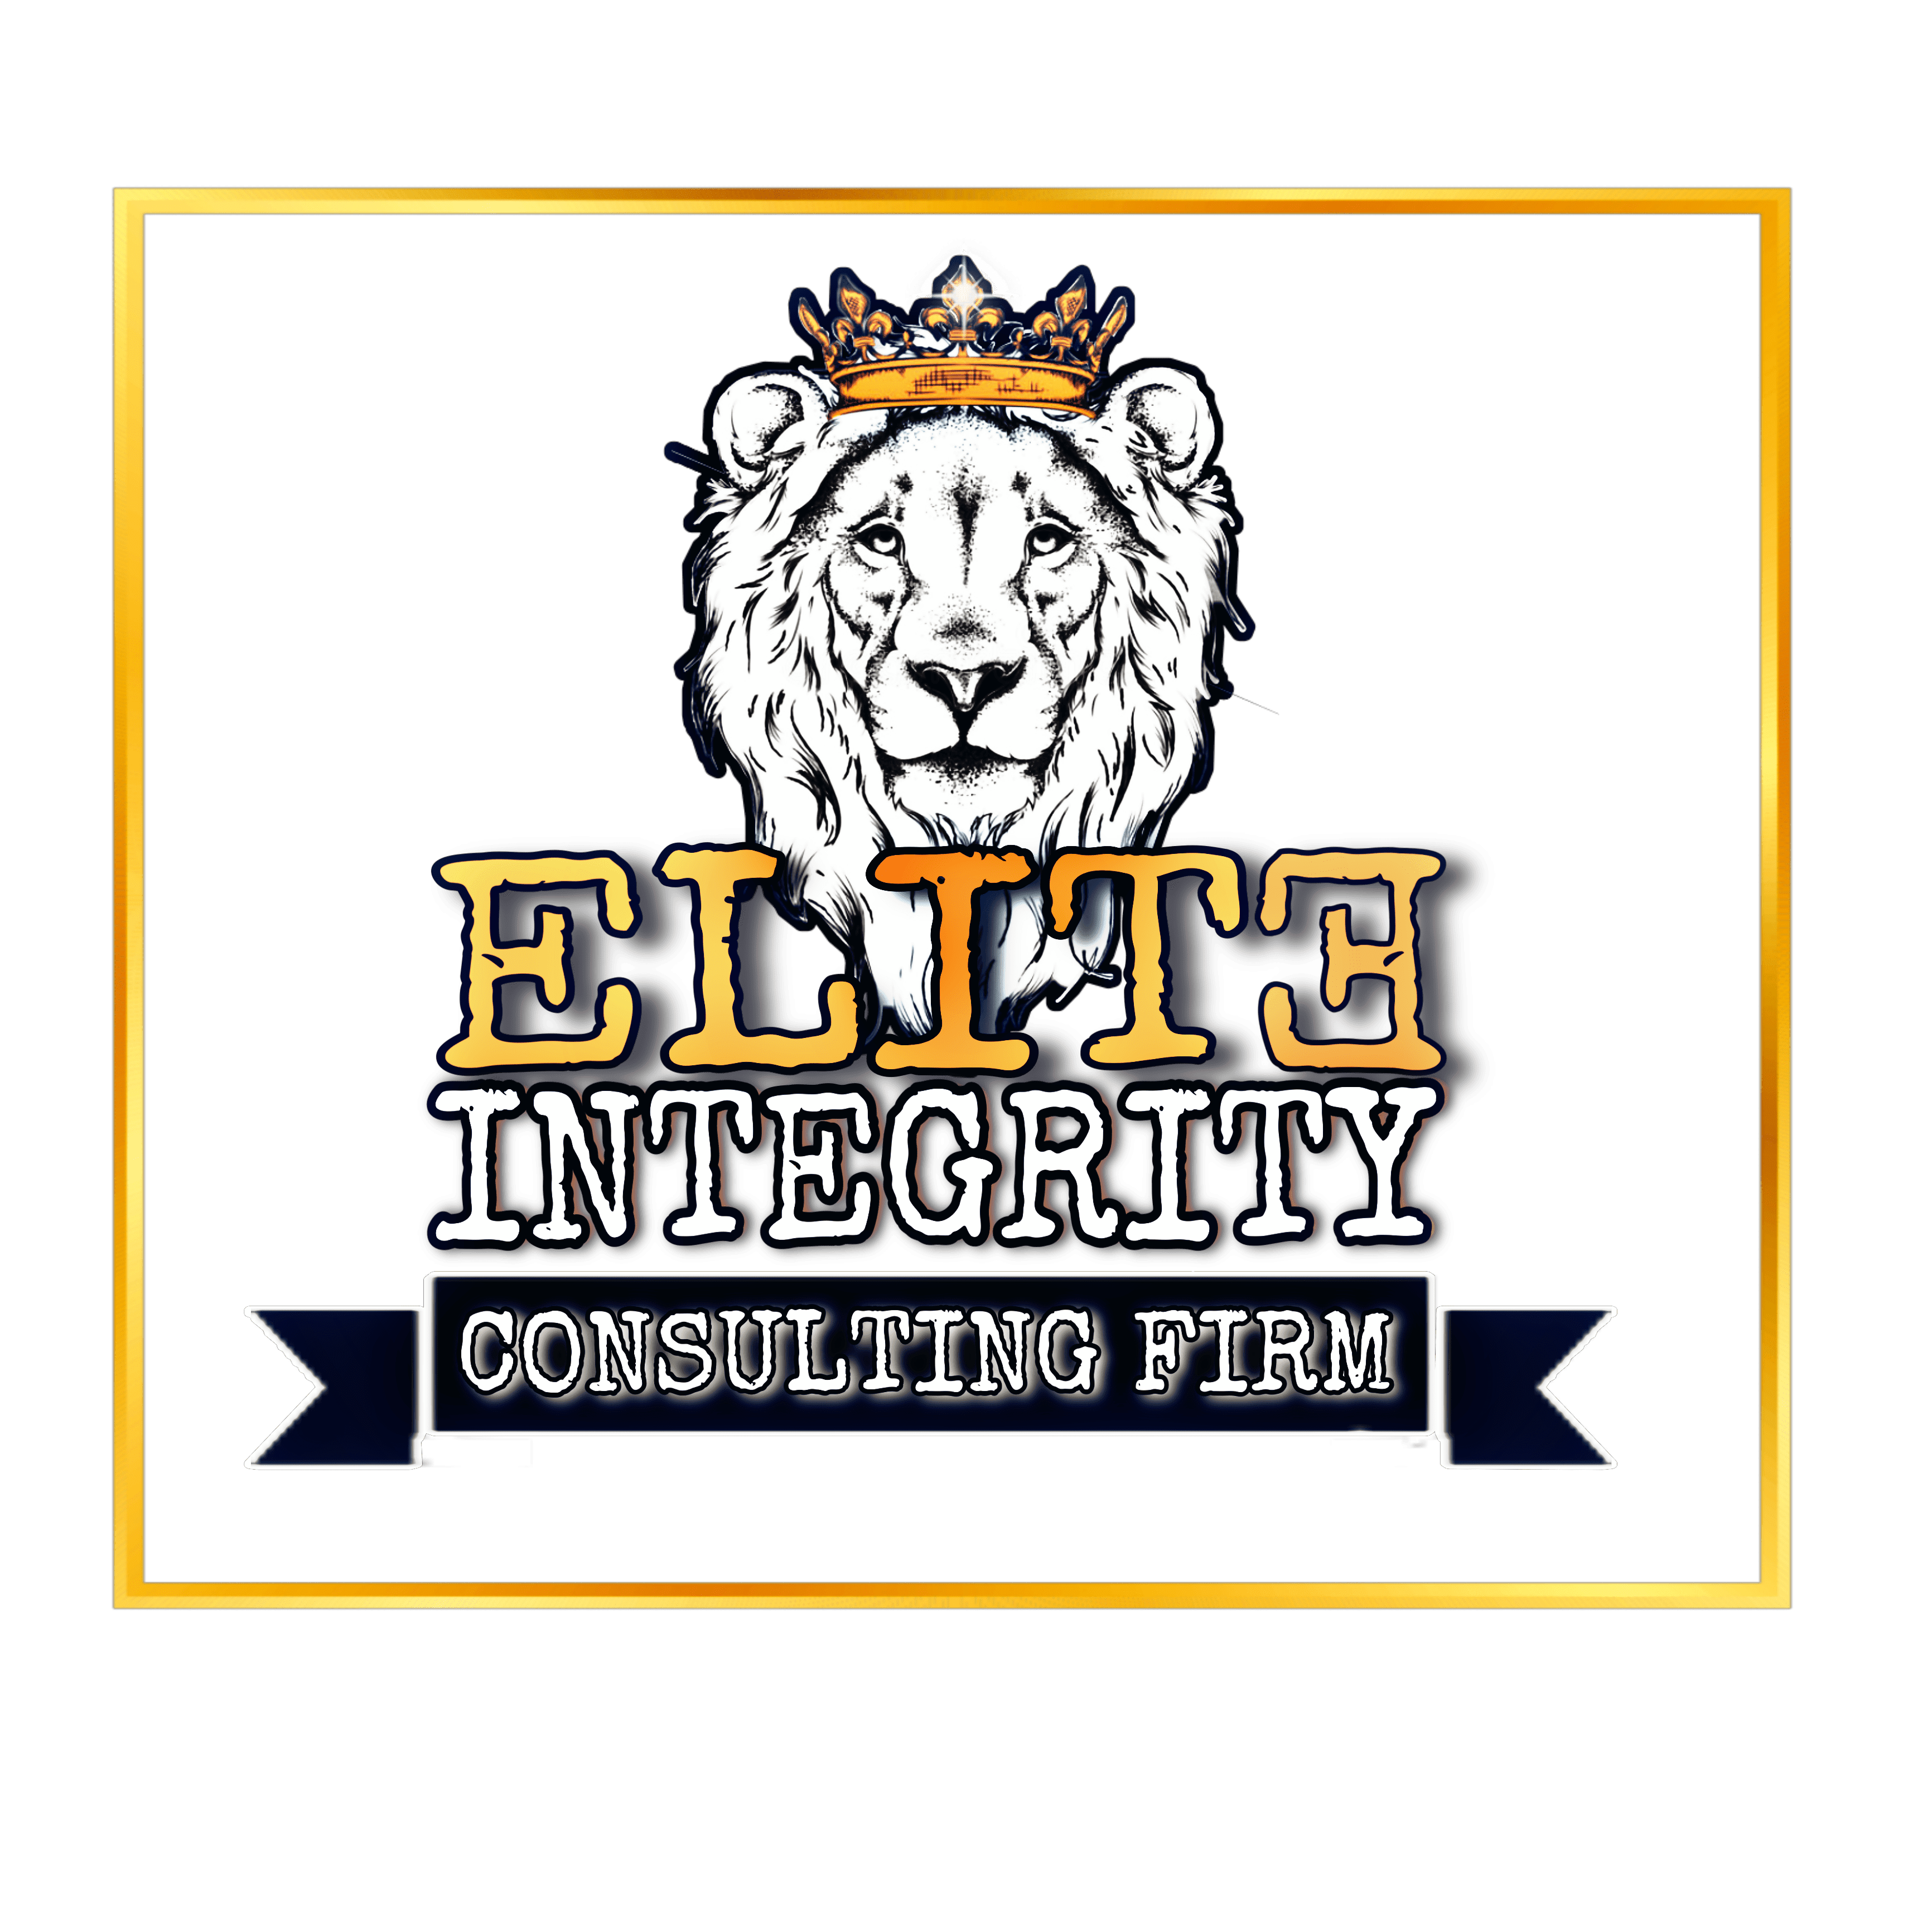 Elite Integrity Consulting Firm